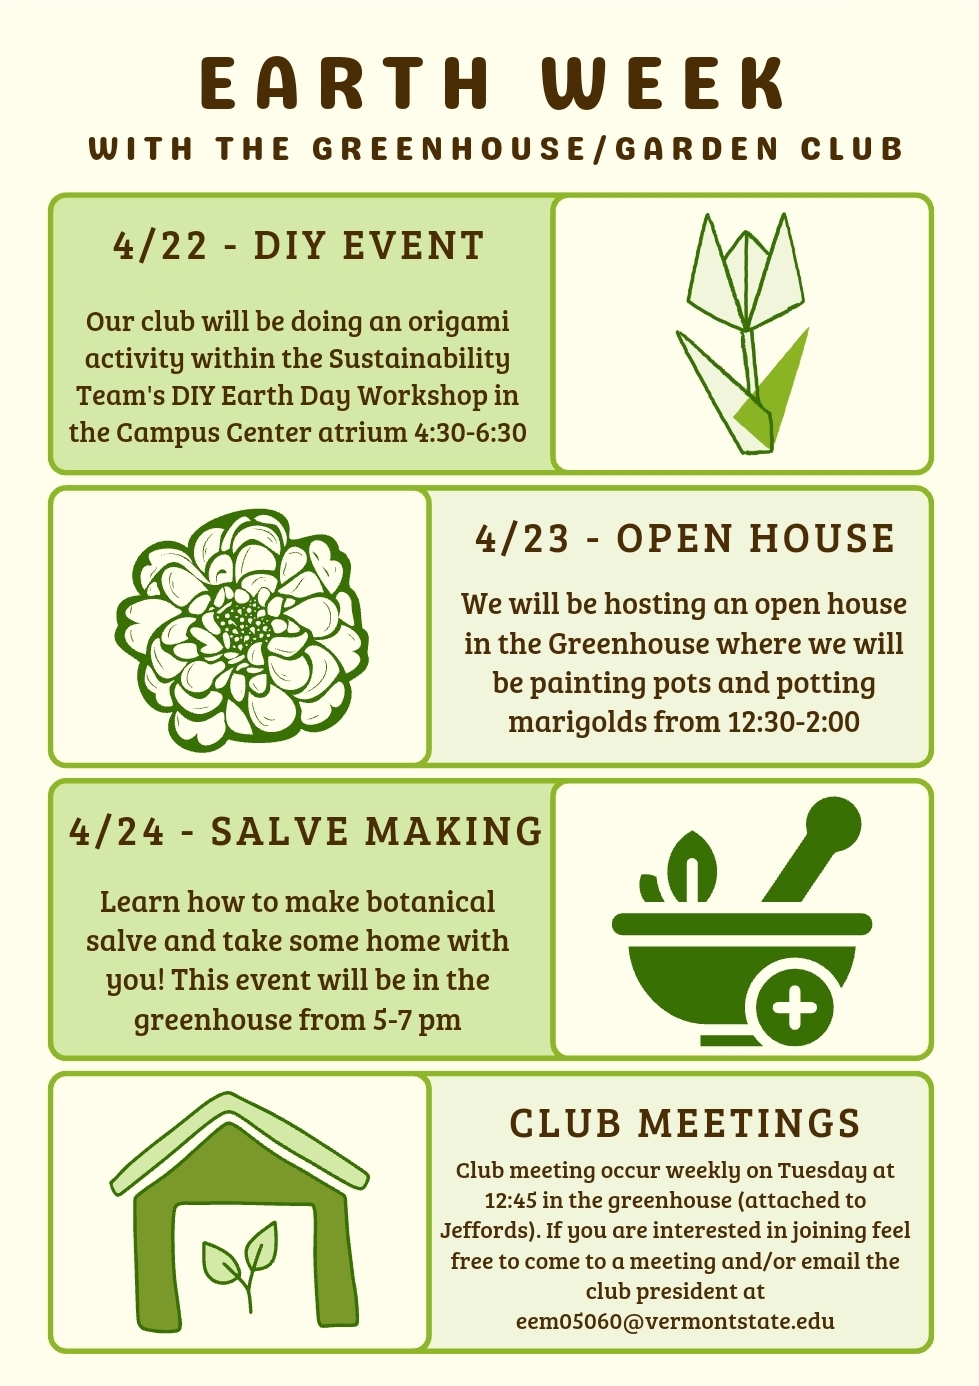 Hello all! The Greenhouse/Garden Club will be hosting a series of events for Earth Week and we hope to see you there! If you have any questions feel free to reach out to the club president Emily Macias at eem05060@vermontstate.edu and check out our Instagram @castleton_gardenclub :)